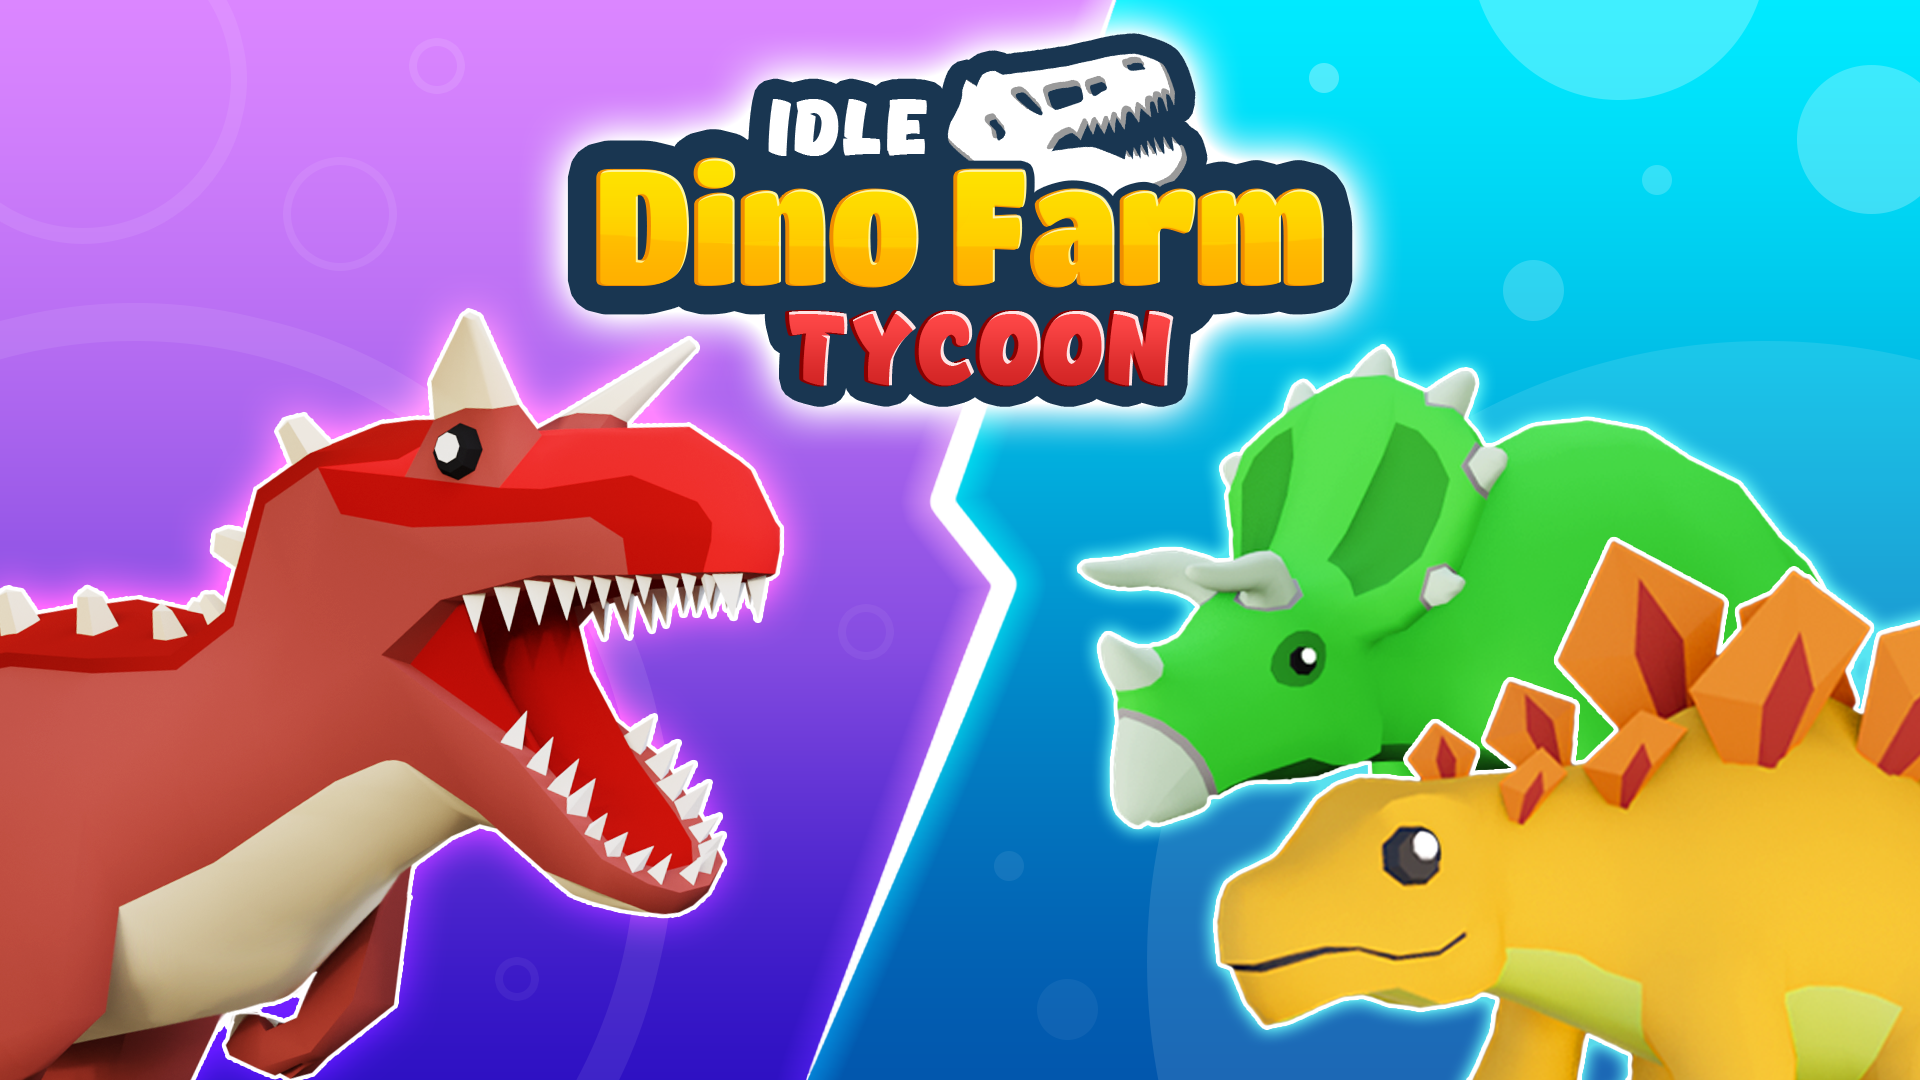 Idle Dino Farm Tycoon 3D Game Image